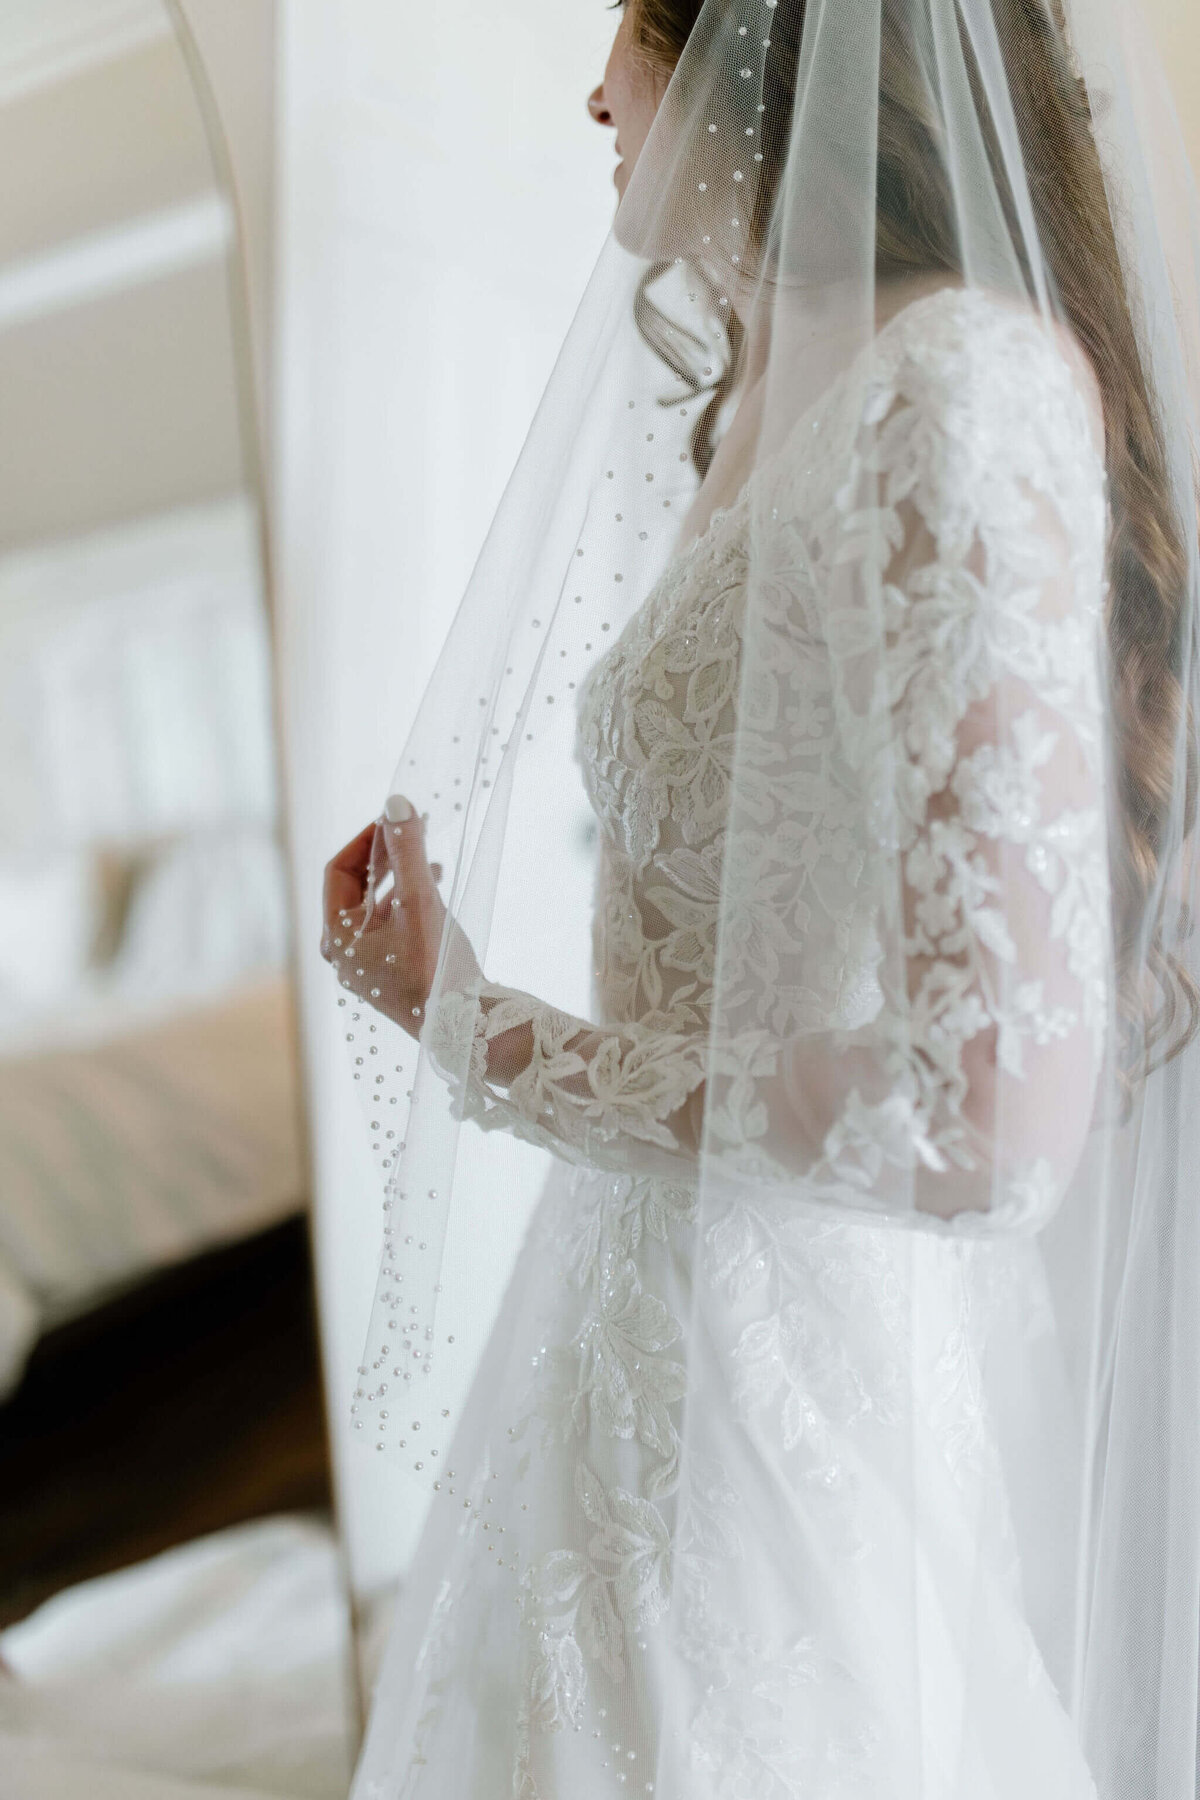 Harleton, TX bride looking into mirror after putting on wedding dress and veil before East Texas wedding ceremony